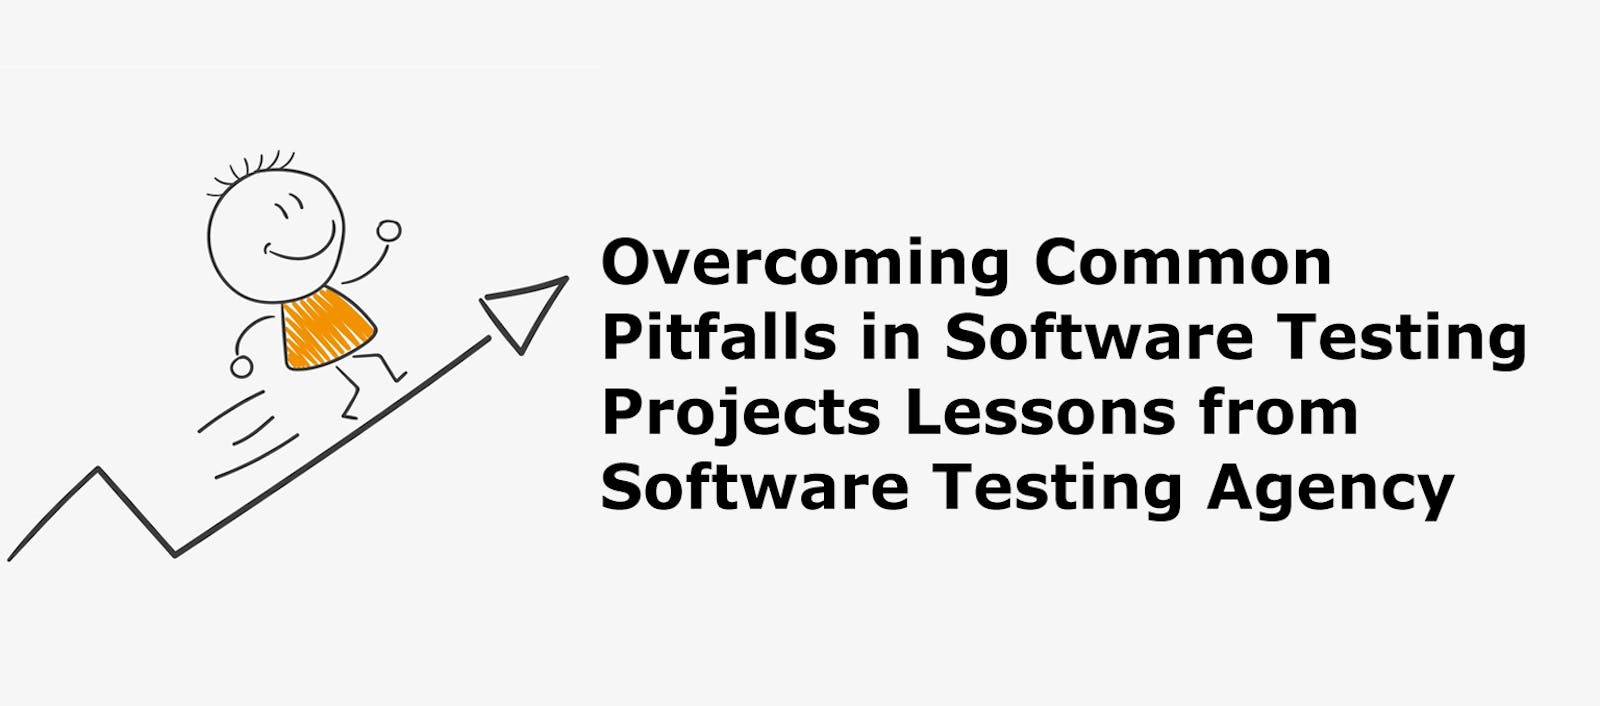 Overcoming Common Pitfalls in Software Testing Projects Lessons from Software Testing Agency